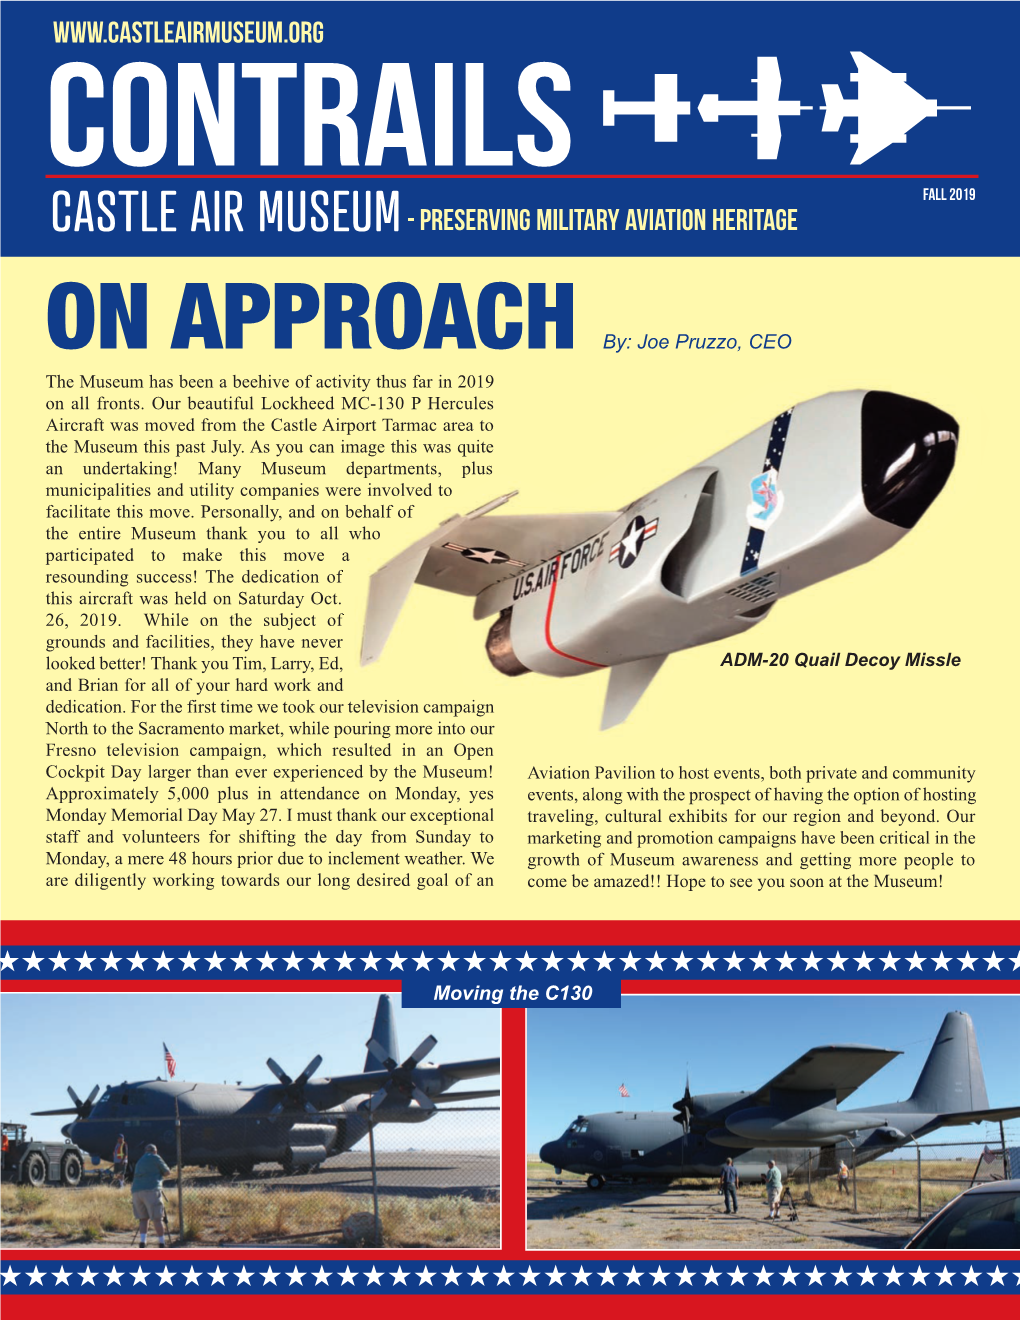 PRESERVING MILITARY AVIATION HERITAGE Www